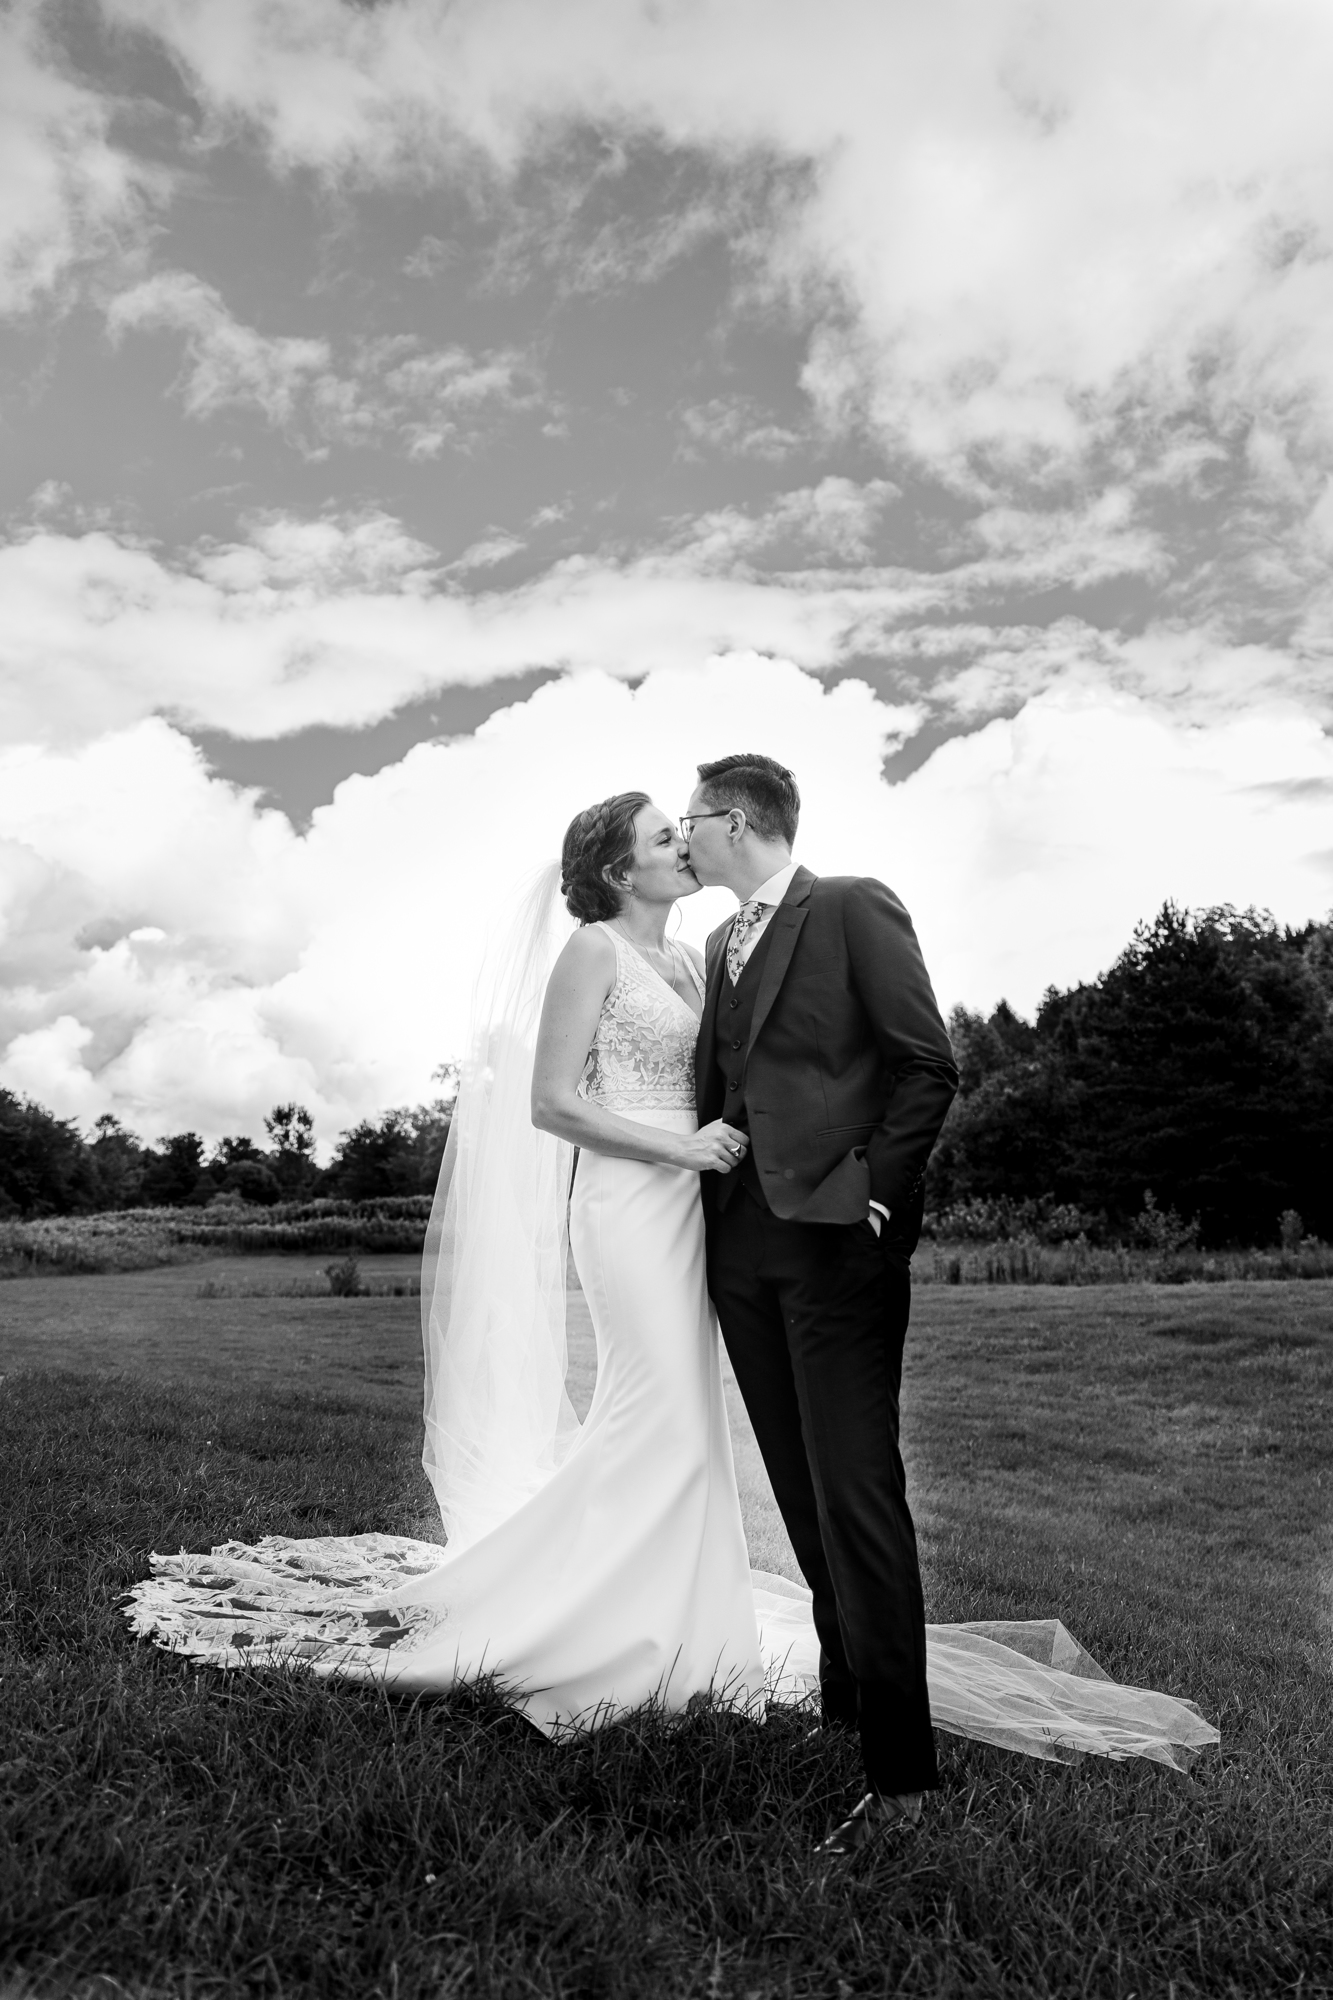 Black and White Upstate Wedding Photos at Cristman Barn in Ilion, New York